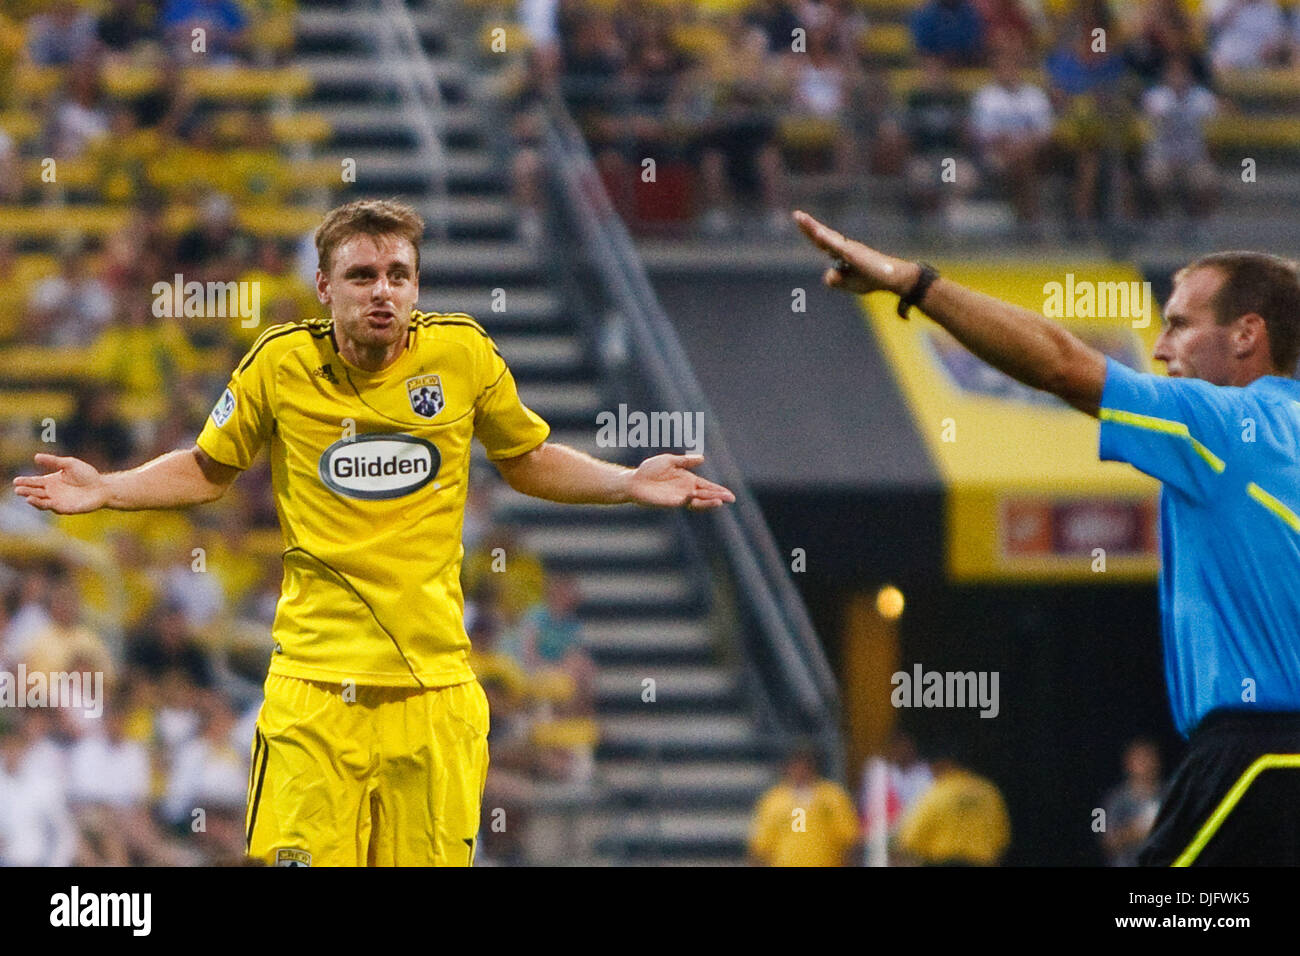 Crew midfielder Eddie Gaven (12) disagrees with referee Terry Vaughn's call during game action.  The Columbus Crew defeated the D.C. United 2-0 at Crew Stadium in Columbus, Ohio. (Credit Image: © Scott Grau/Southcreek Global/ZUMApress.com) Stock Photo